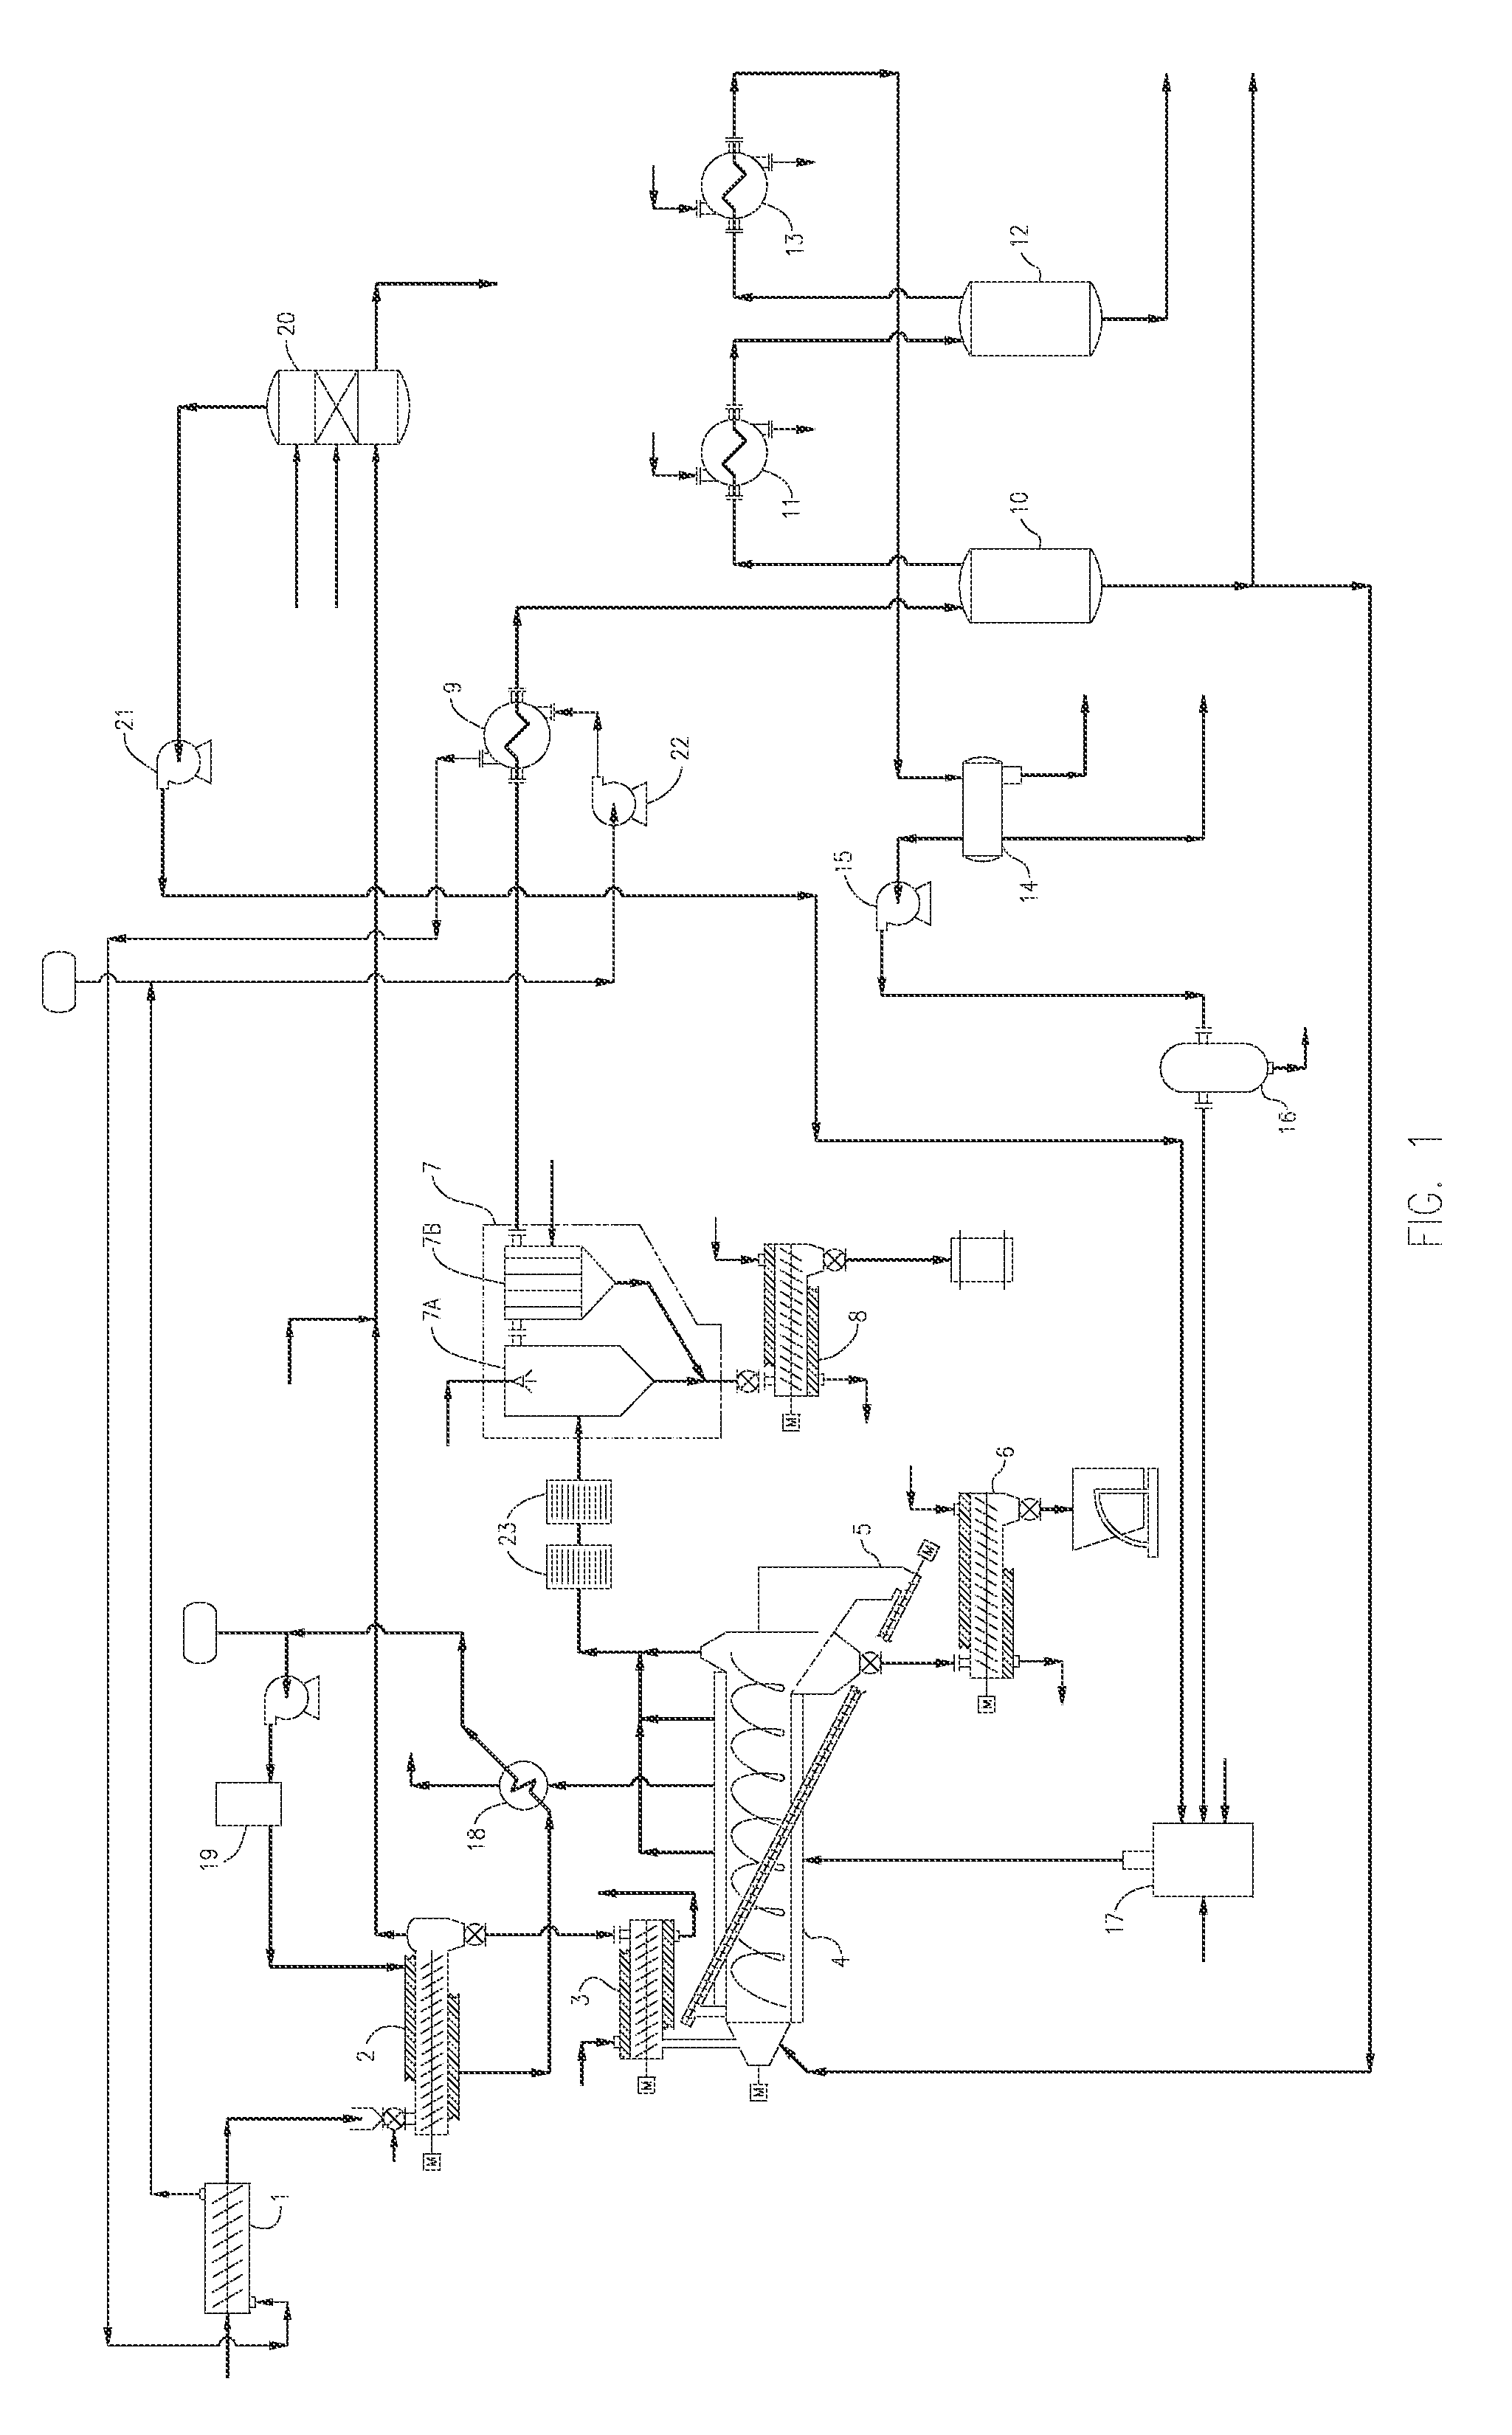 Process and Apparatus for producing Hydrocarbon Fuel from Waste Plastic